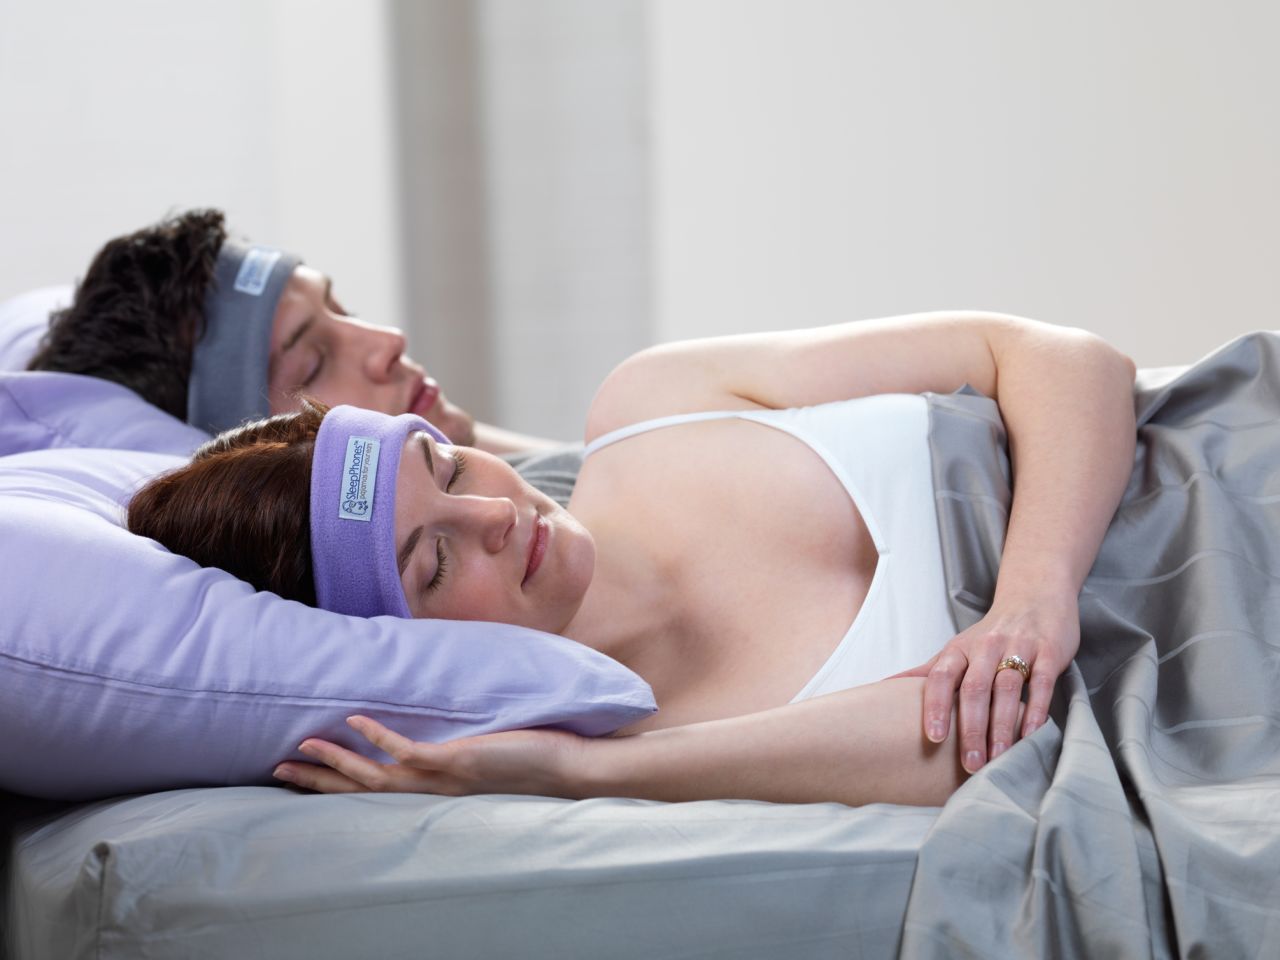 SleepPhones are "headphones in a headband" that fit snugly around your ears and provide hours of audio to help reduce ambient noises. 